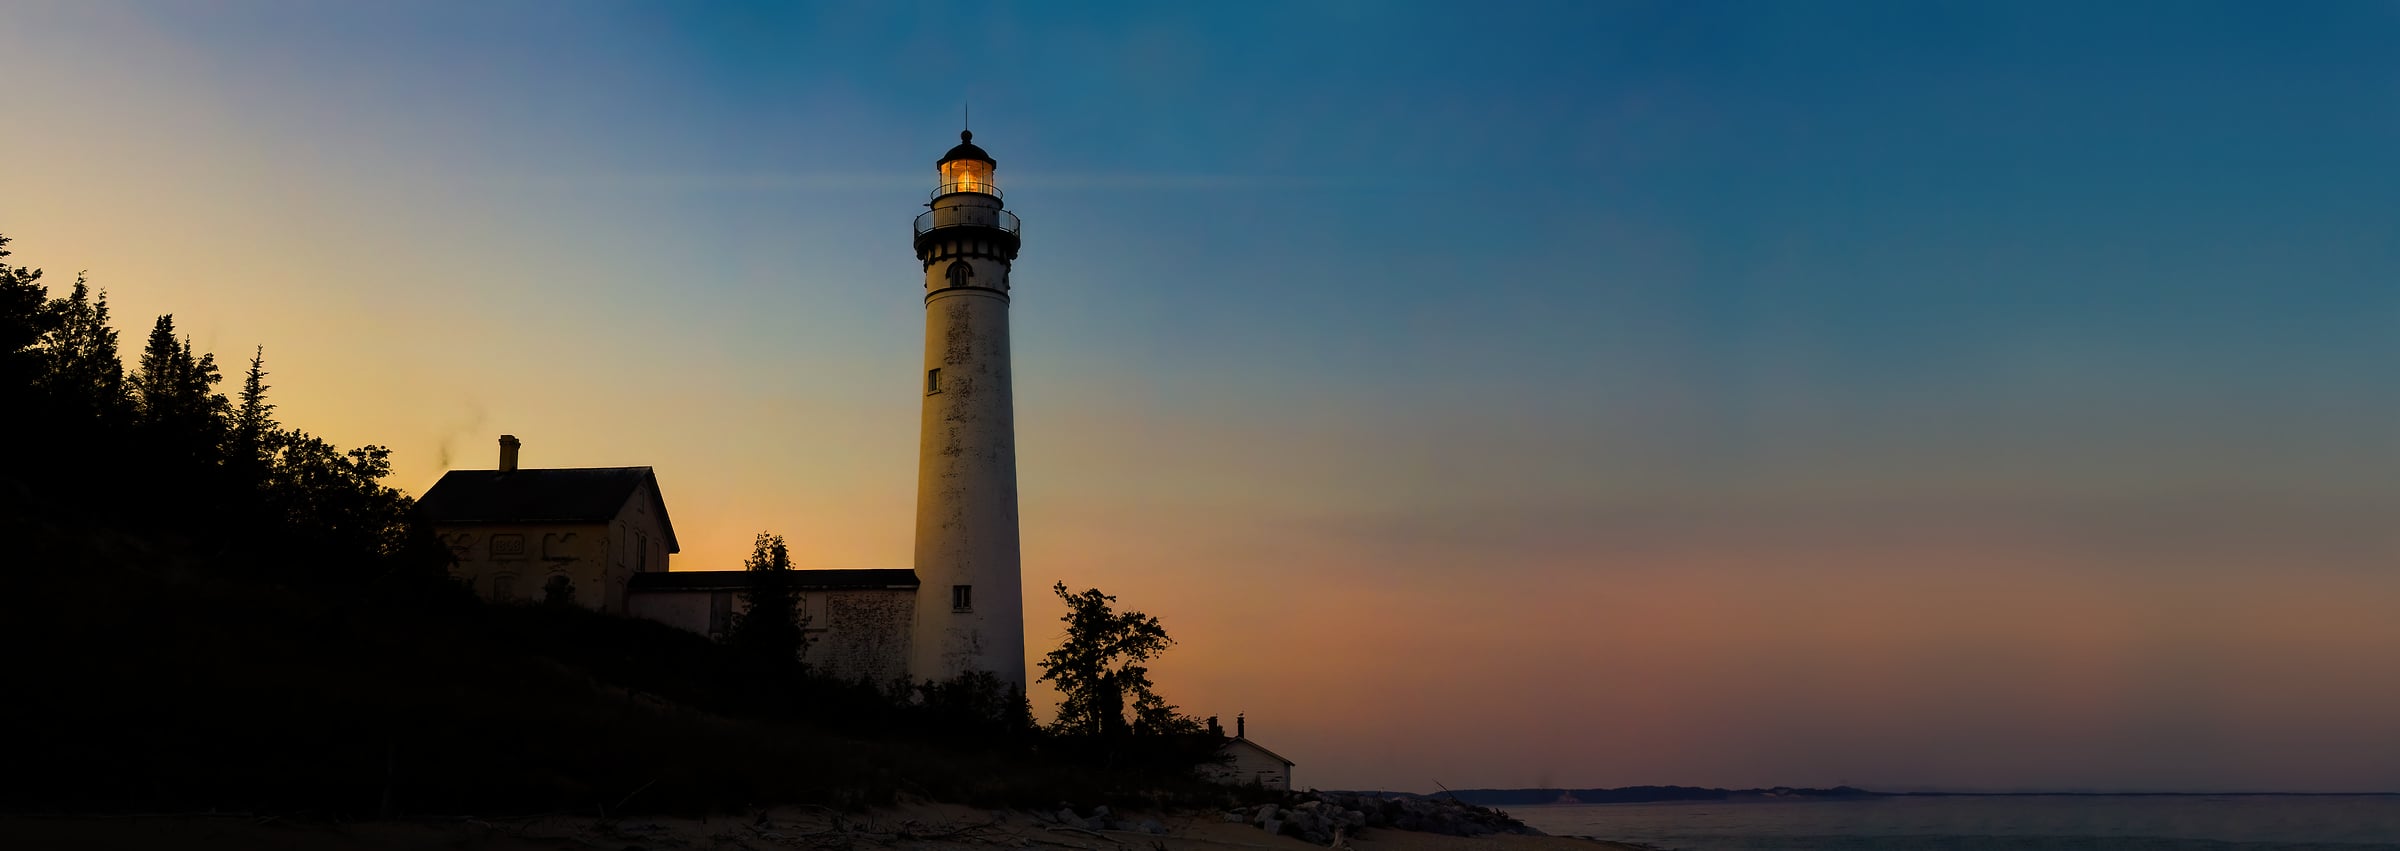 276 megapixels! A very high resolution, large-format VAST photo print of a lighthouse at dusk; photograph created by David David in South Manitou Island, Lake Michigan, Michigan.